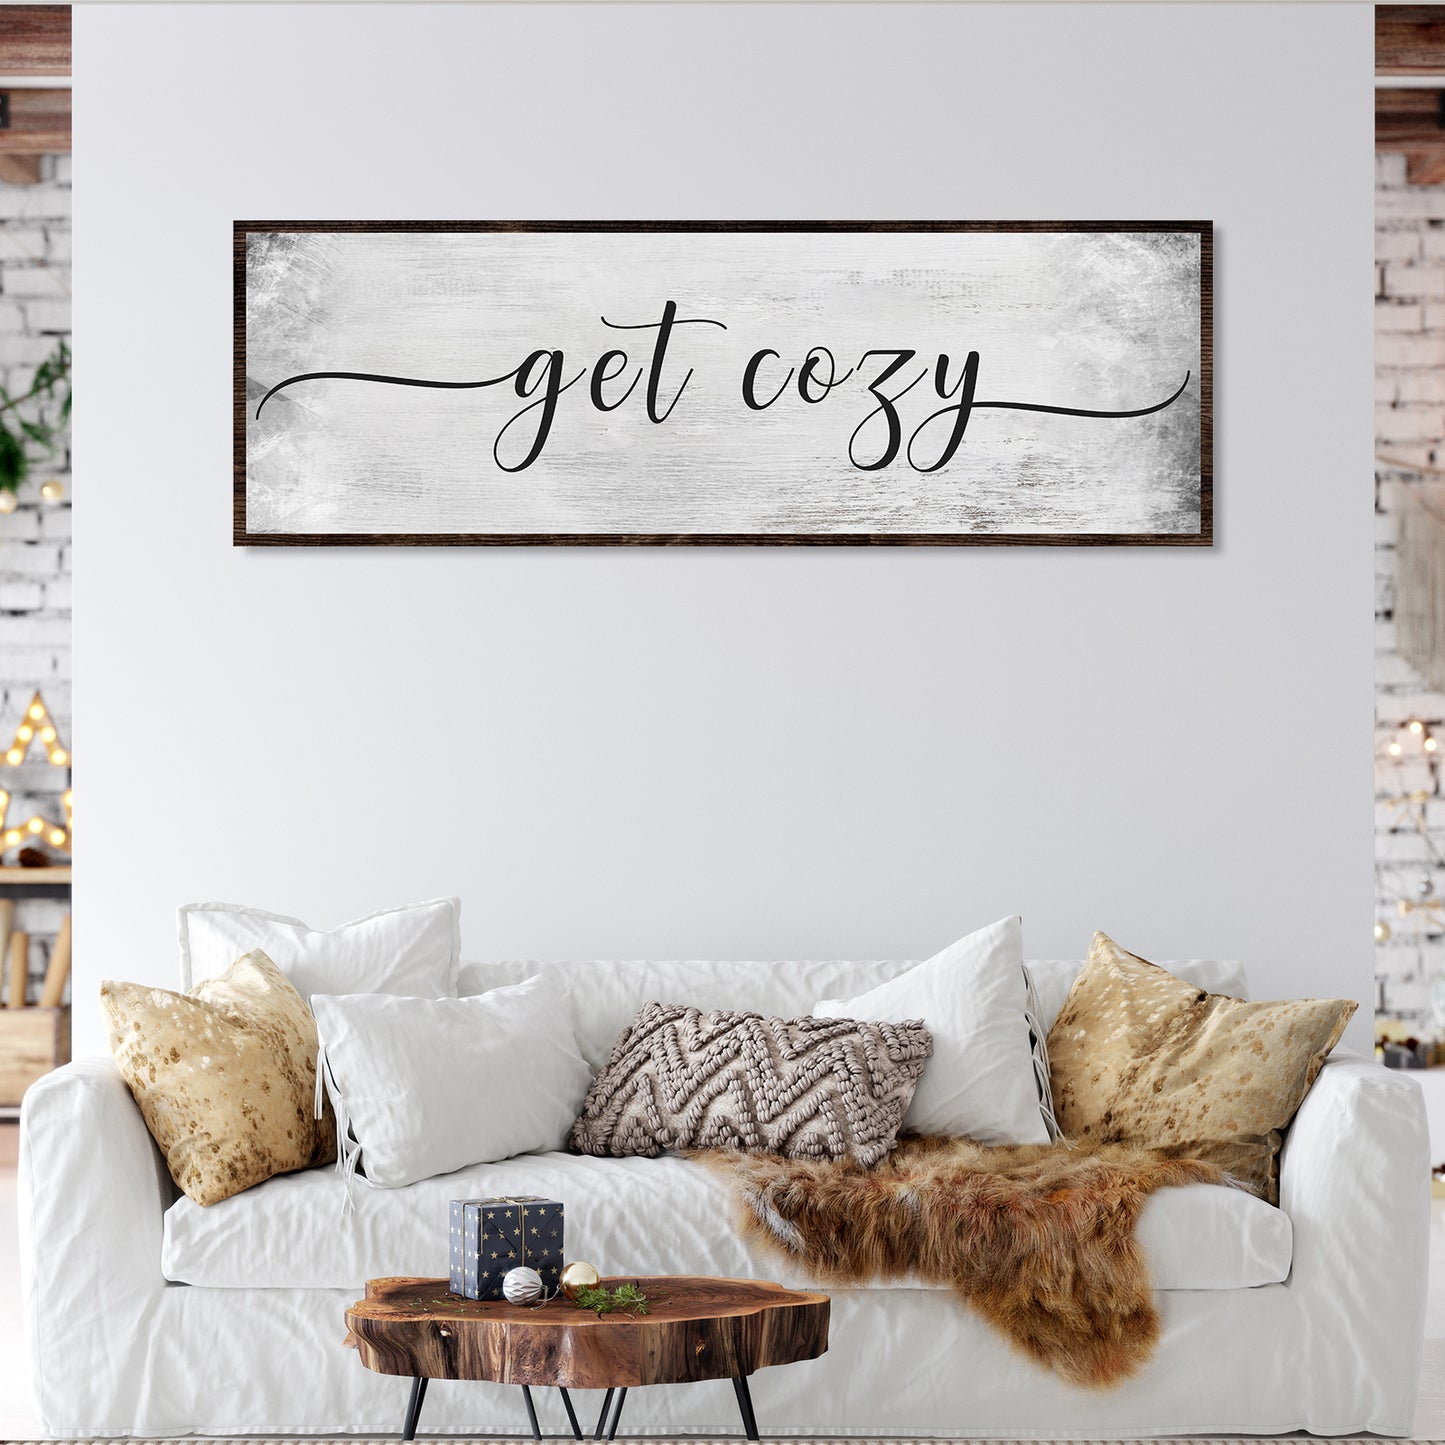 Get Cozy - Image by Tailored Canvases